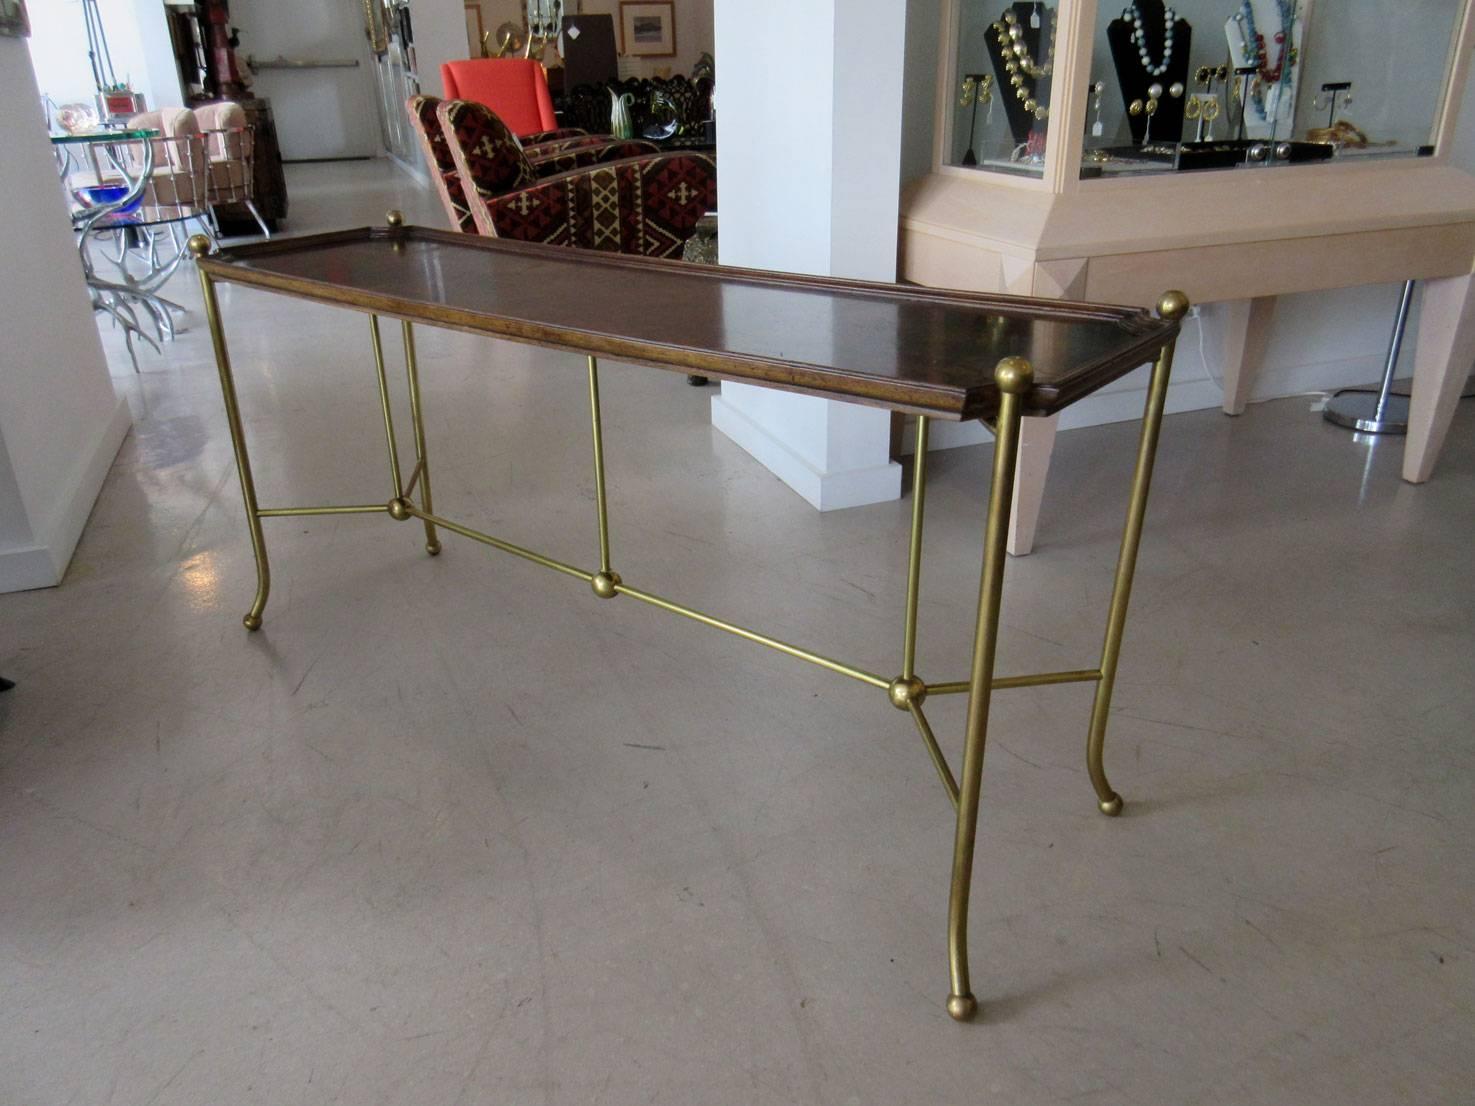 Vintage William Doezema for Mastercraft console table. The console is a dramatic combination of deep burl wood and simple brass hardware punctuated by brass balls.